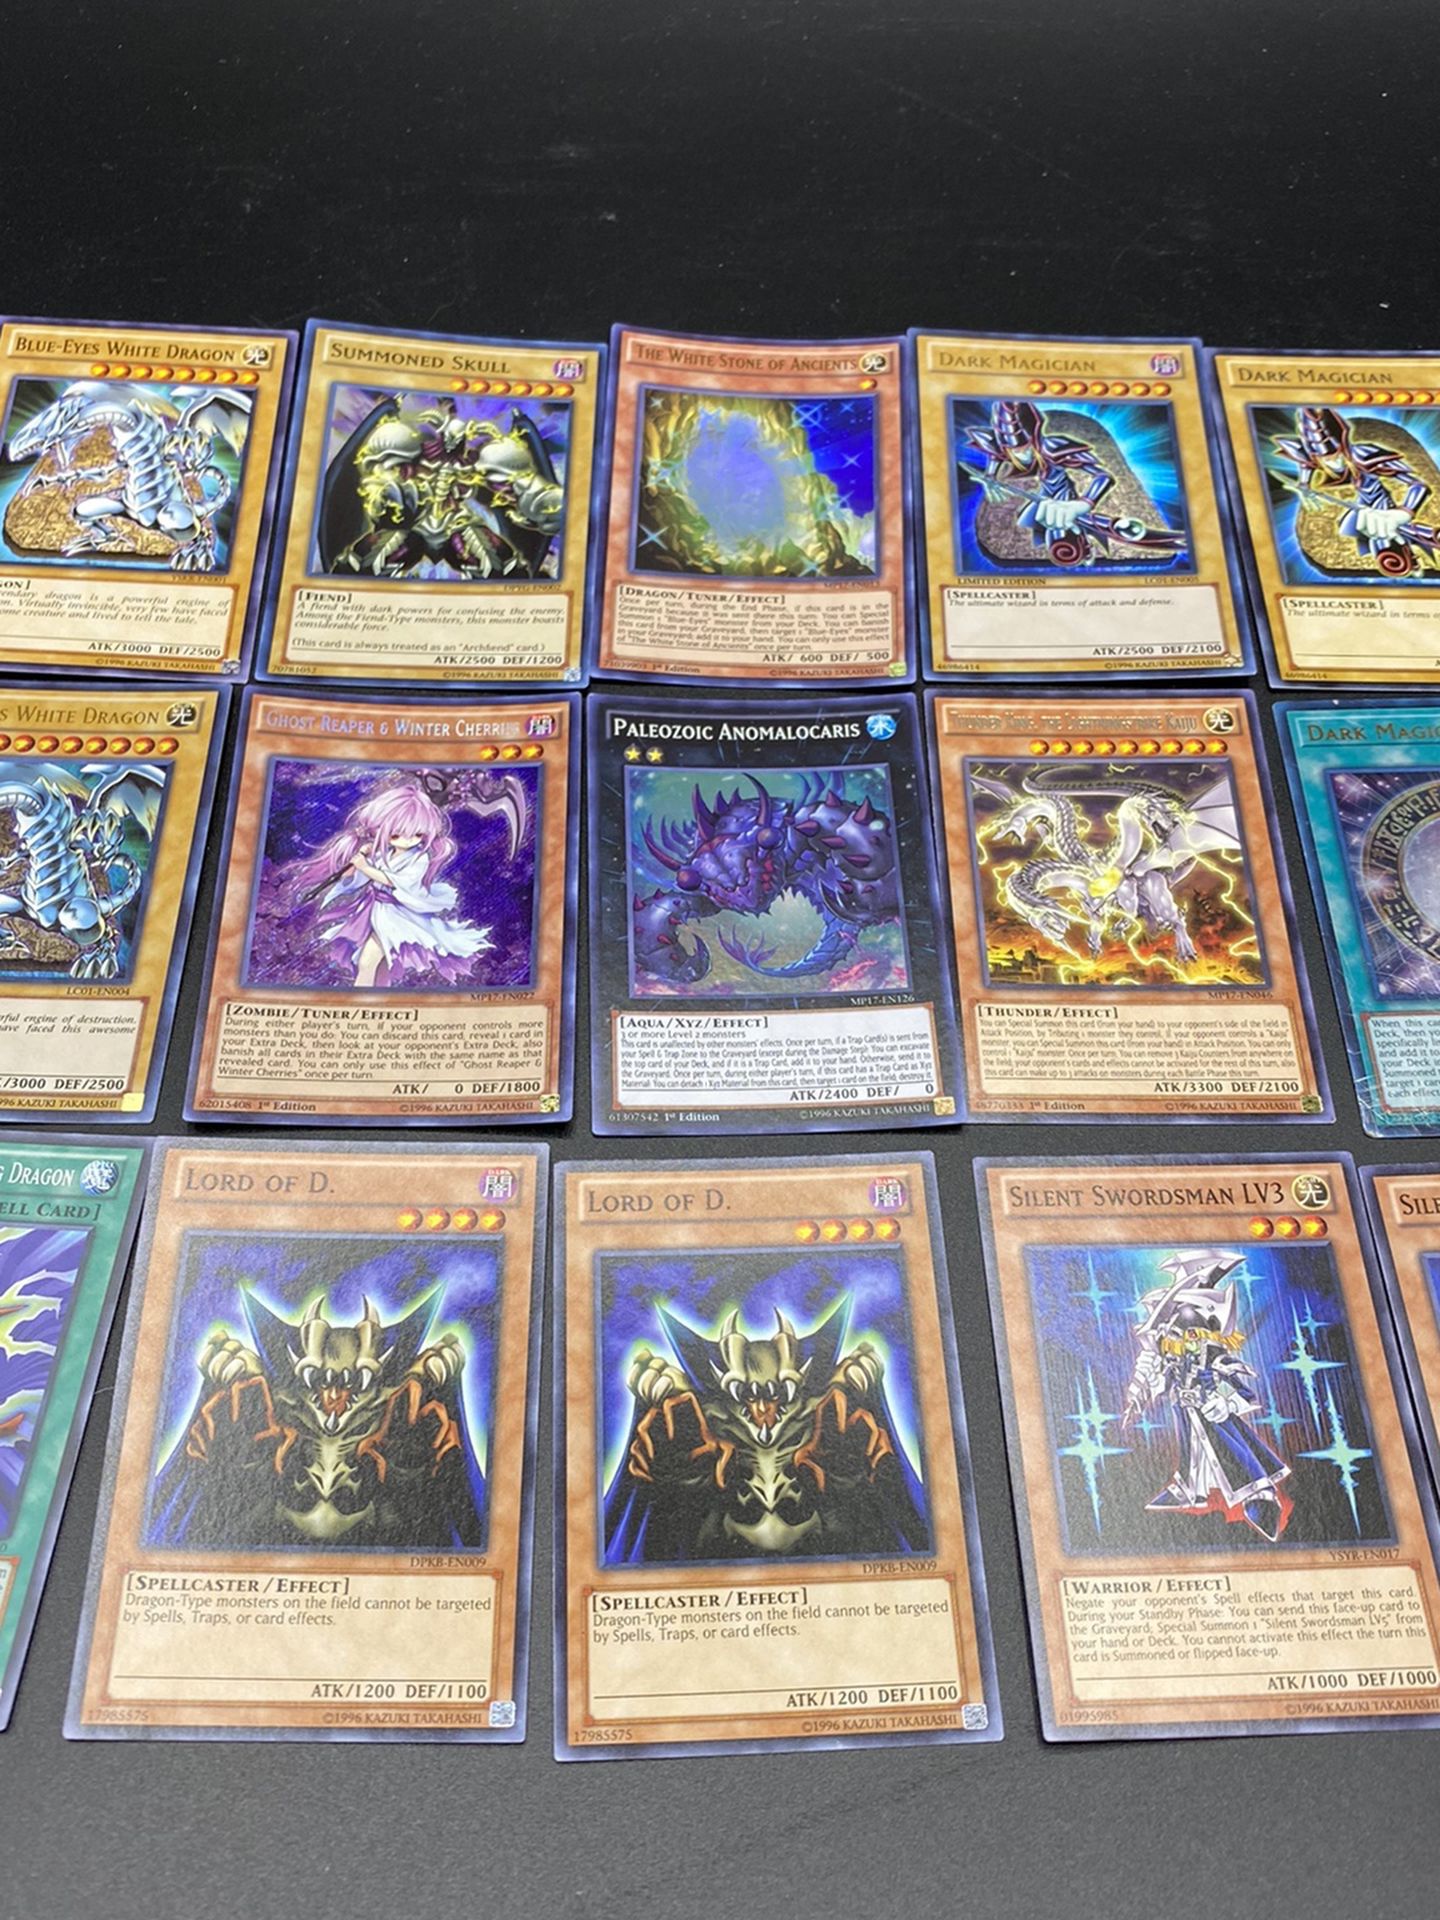 Lot 100 Yu Gi Oh Cards Blue Eyes White Dragon Dark Magician Summoned Skull W BOX PICTURES TAKEN ARE IN MY OPINION THE RARE CARDS I AM NOT A YU GI OH C